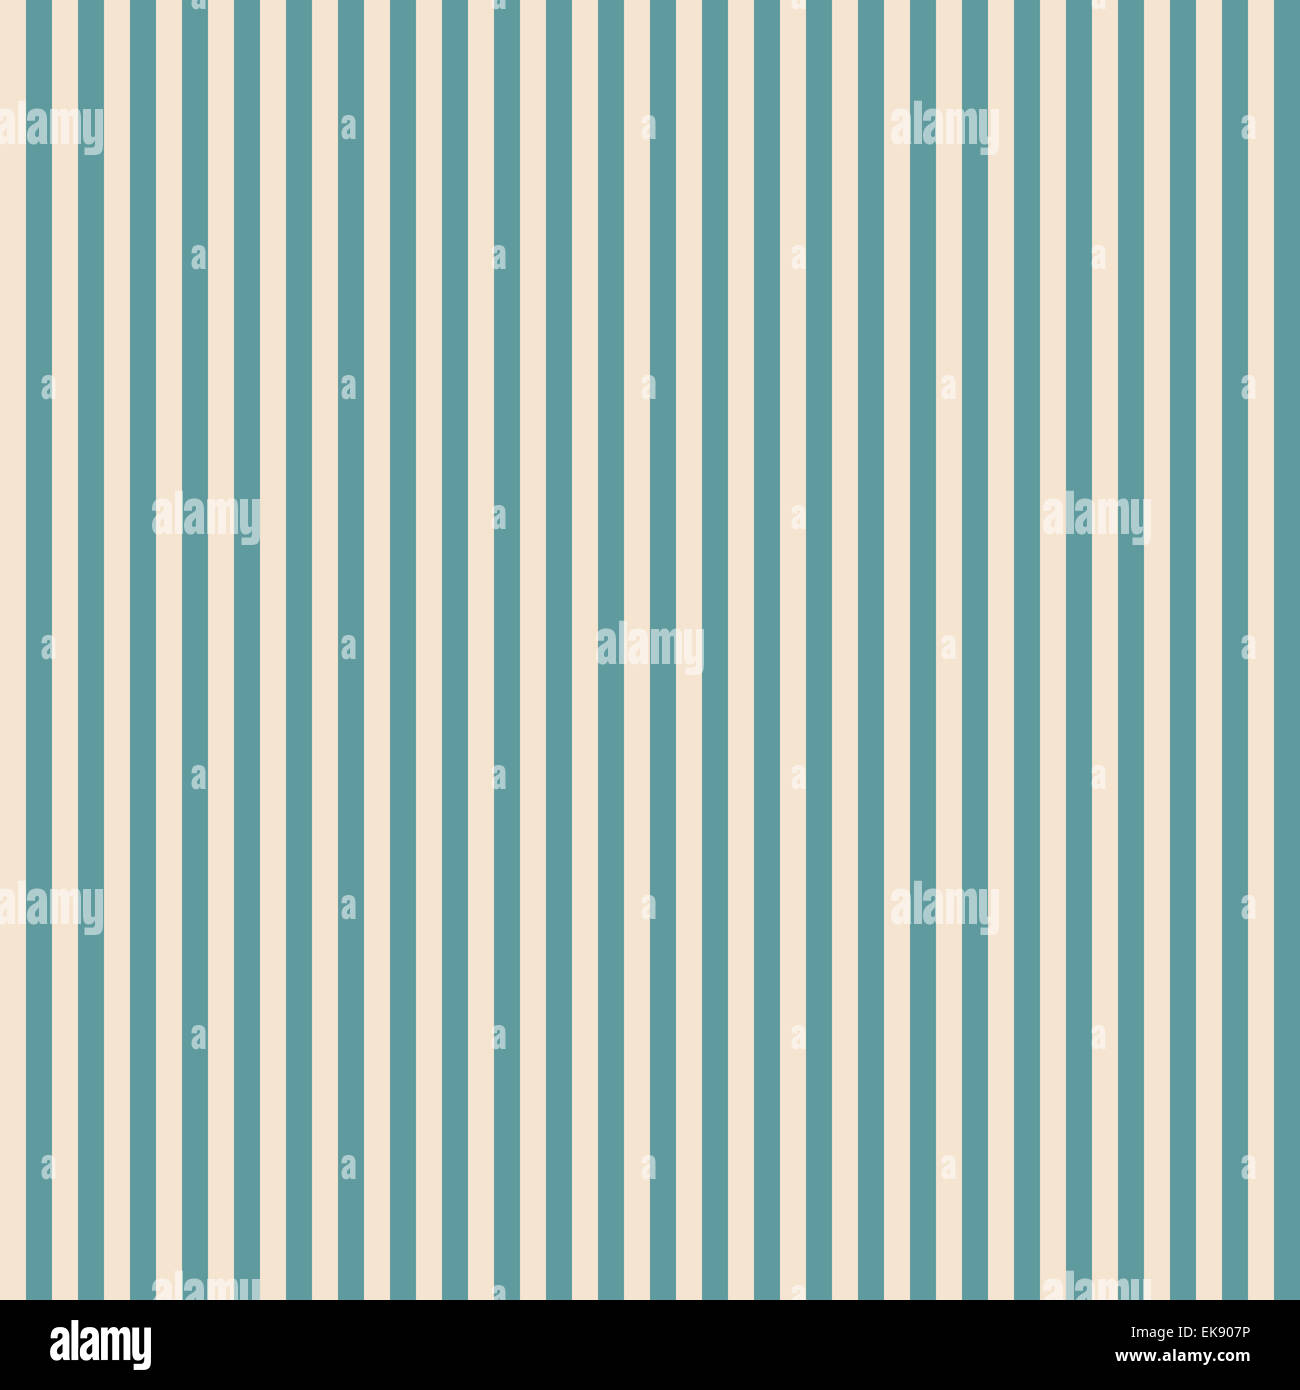 Vintage Blue and Beige Striped Seamless Pattern Background Saved in Swatches Panel Stock Photo